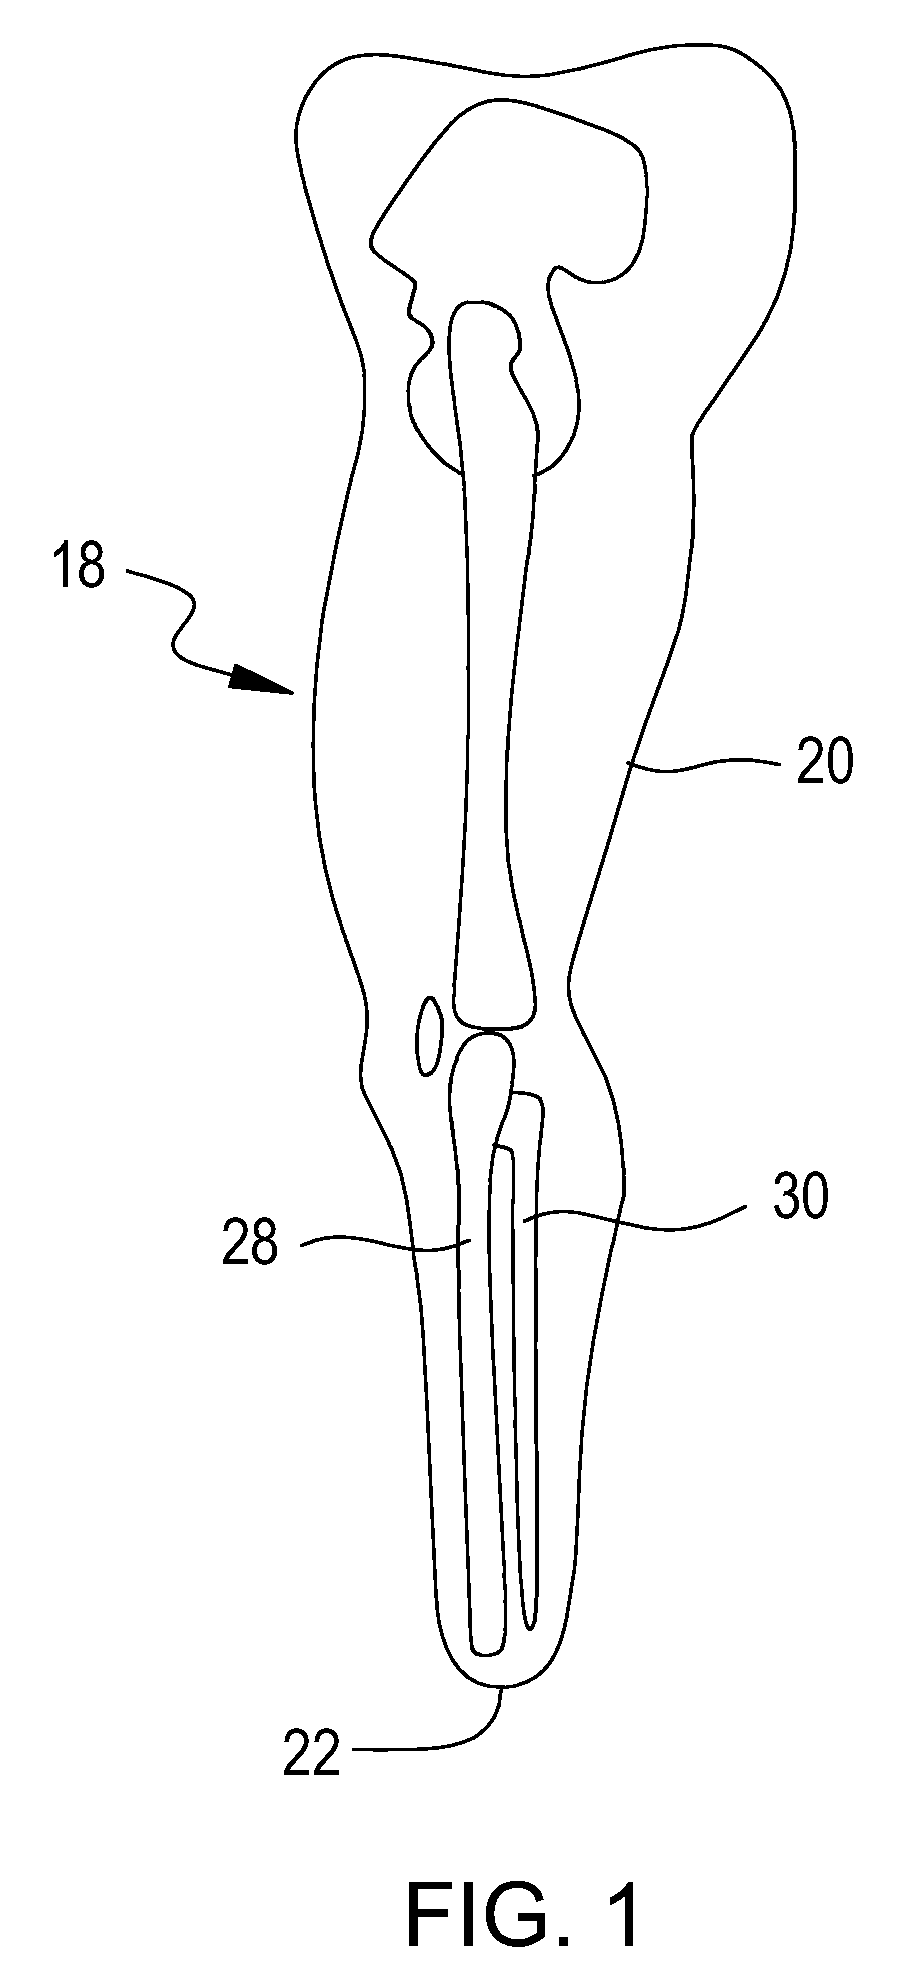 Vacuum assisted prosthetic sleeve and socket utilizing a double membrane liner